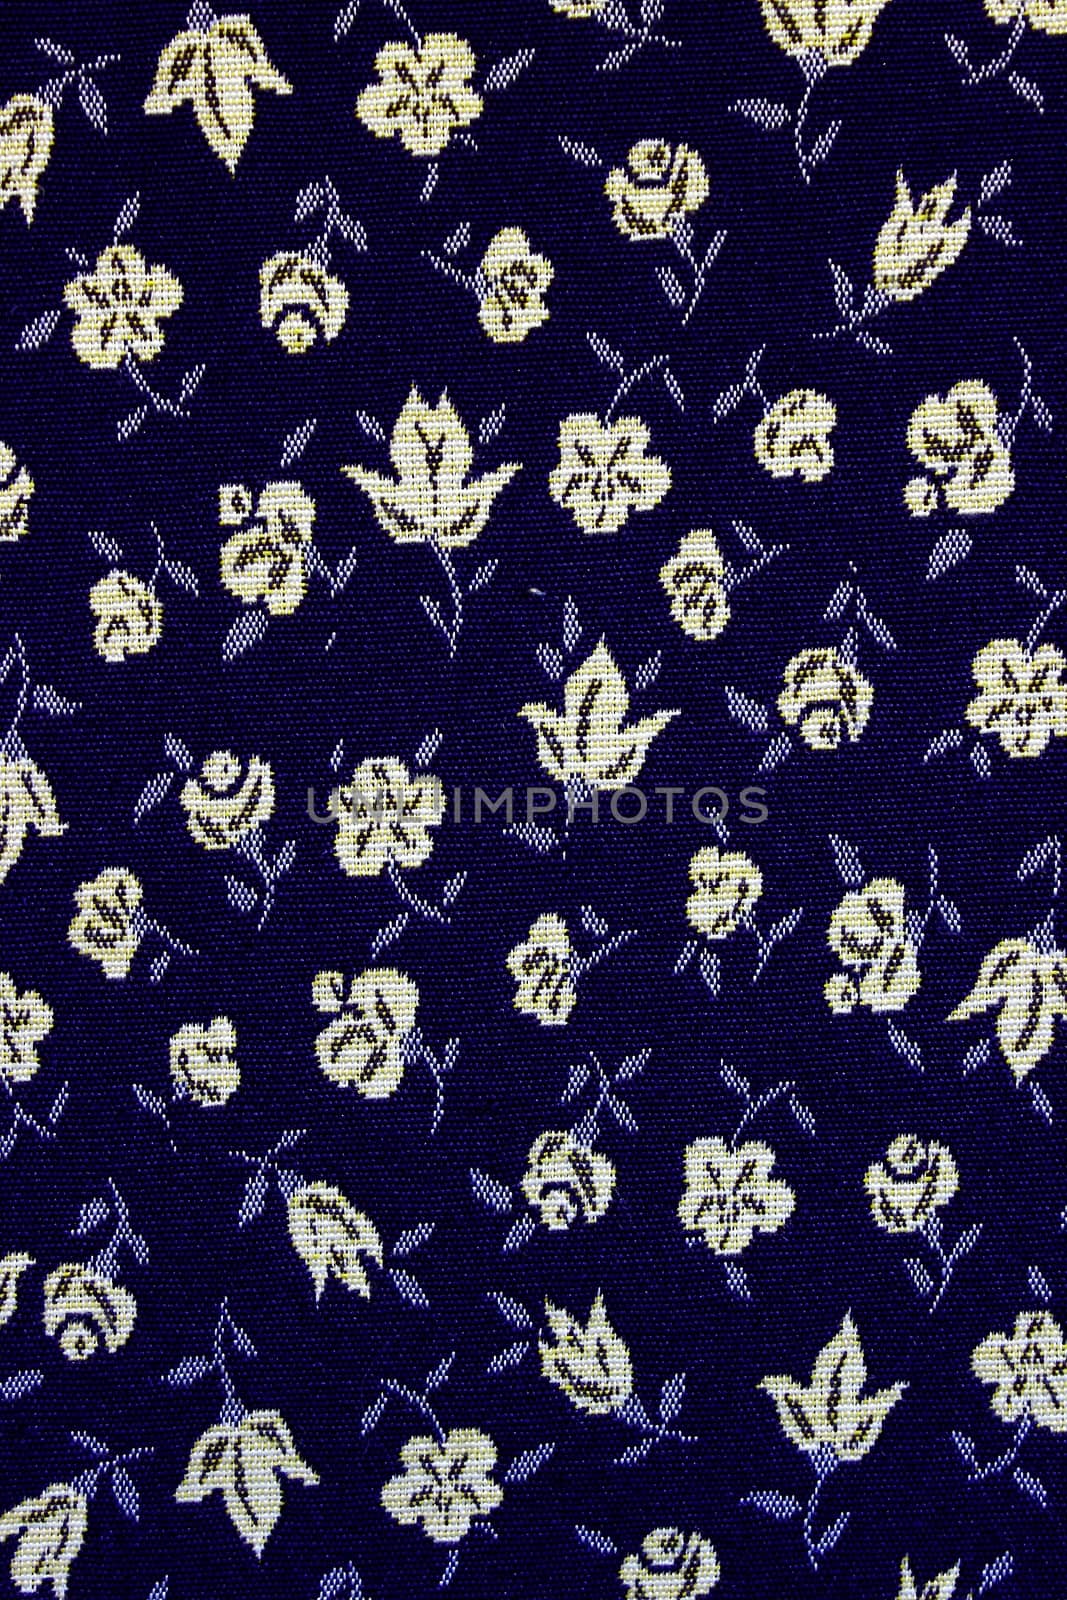 Old woven with flowers white and blue